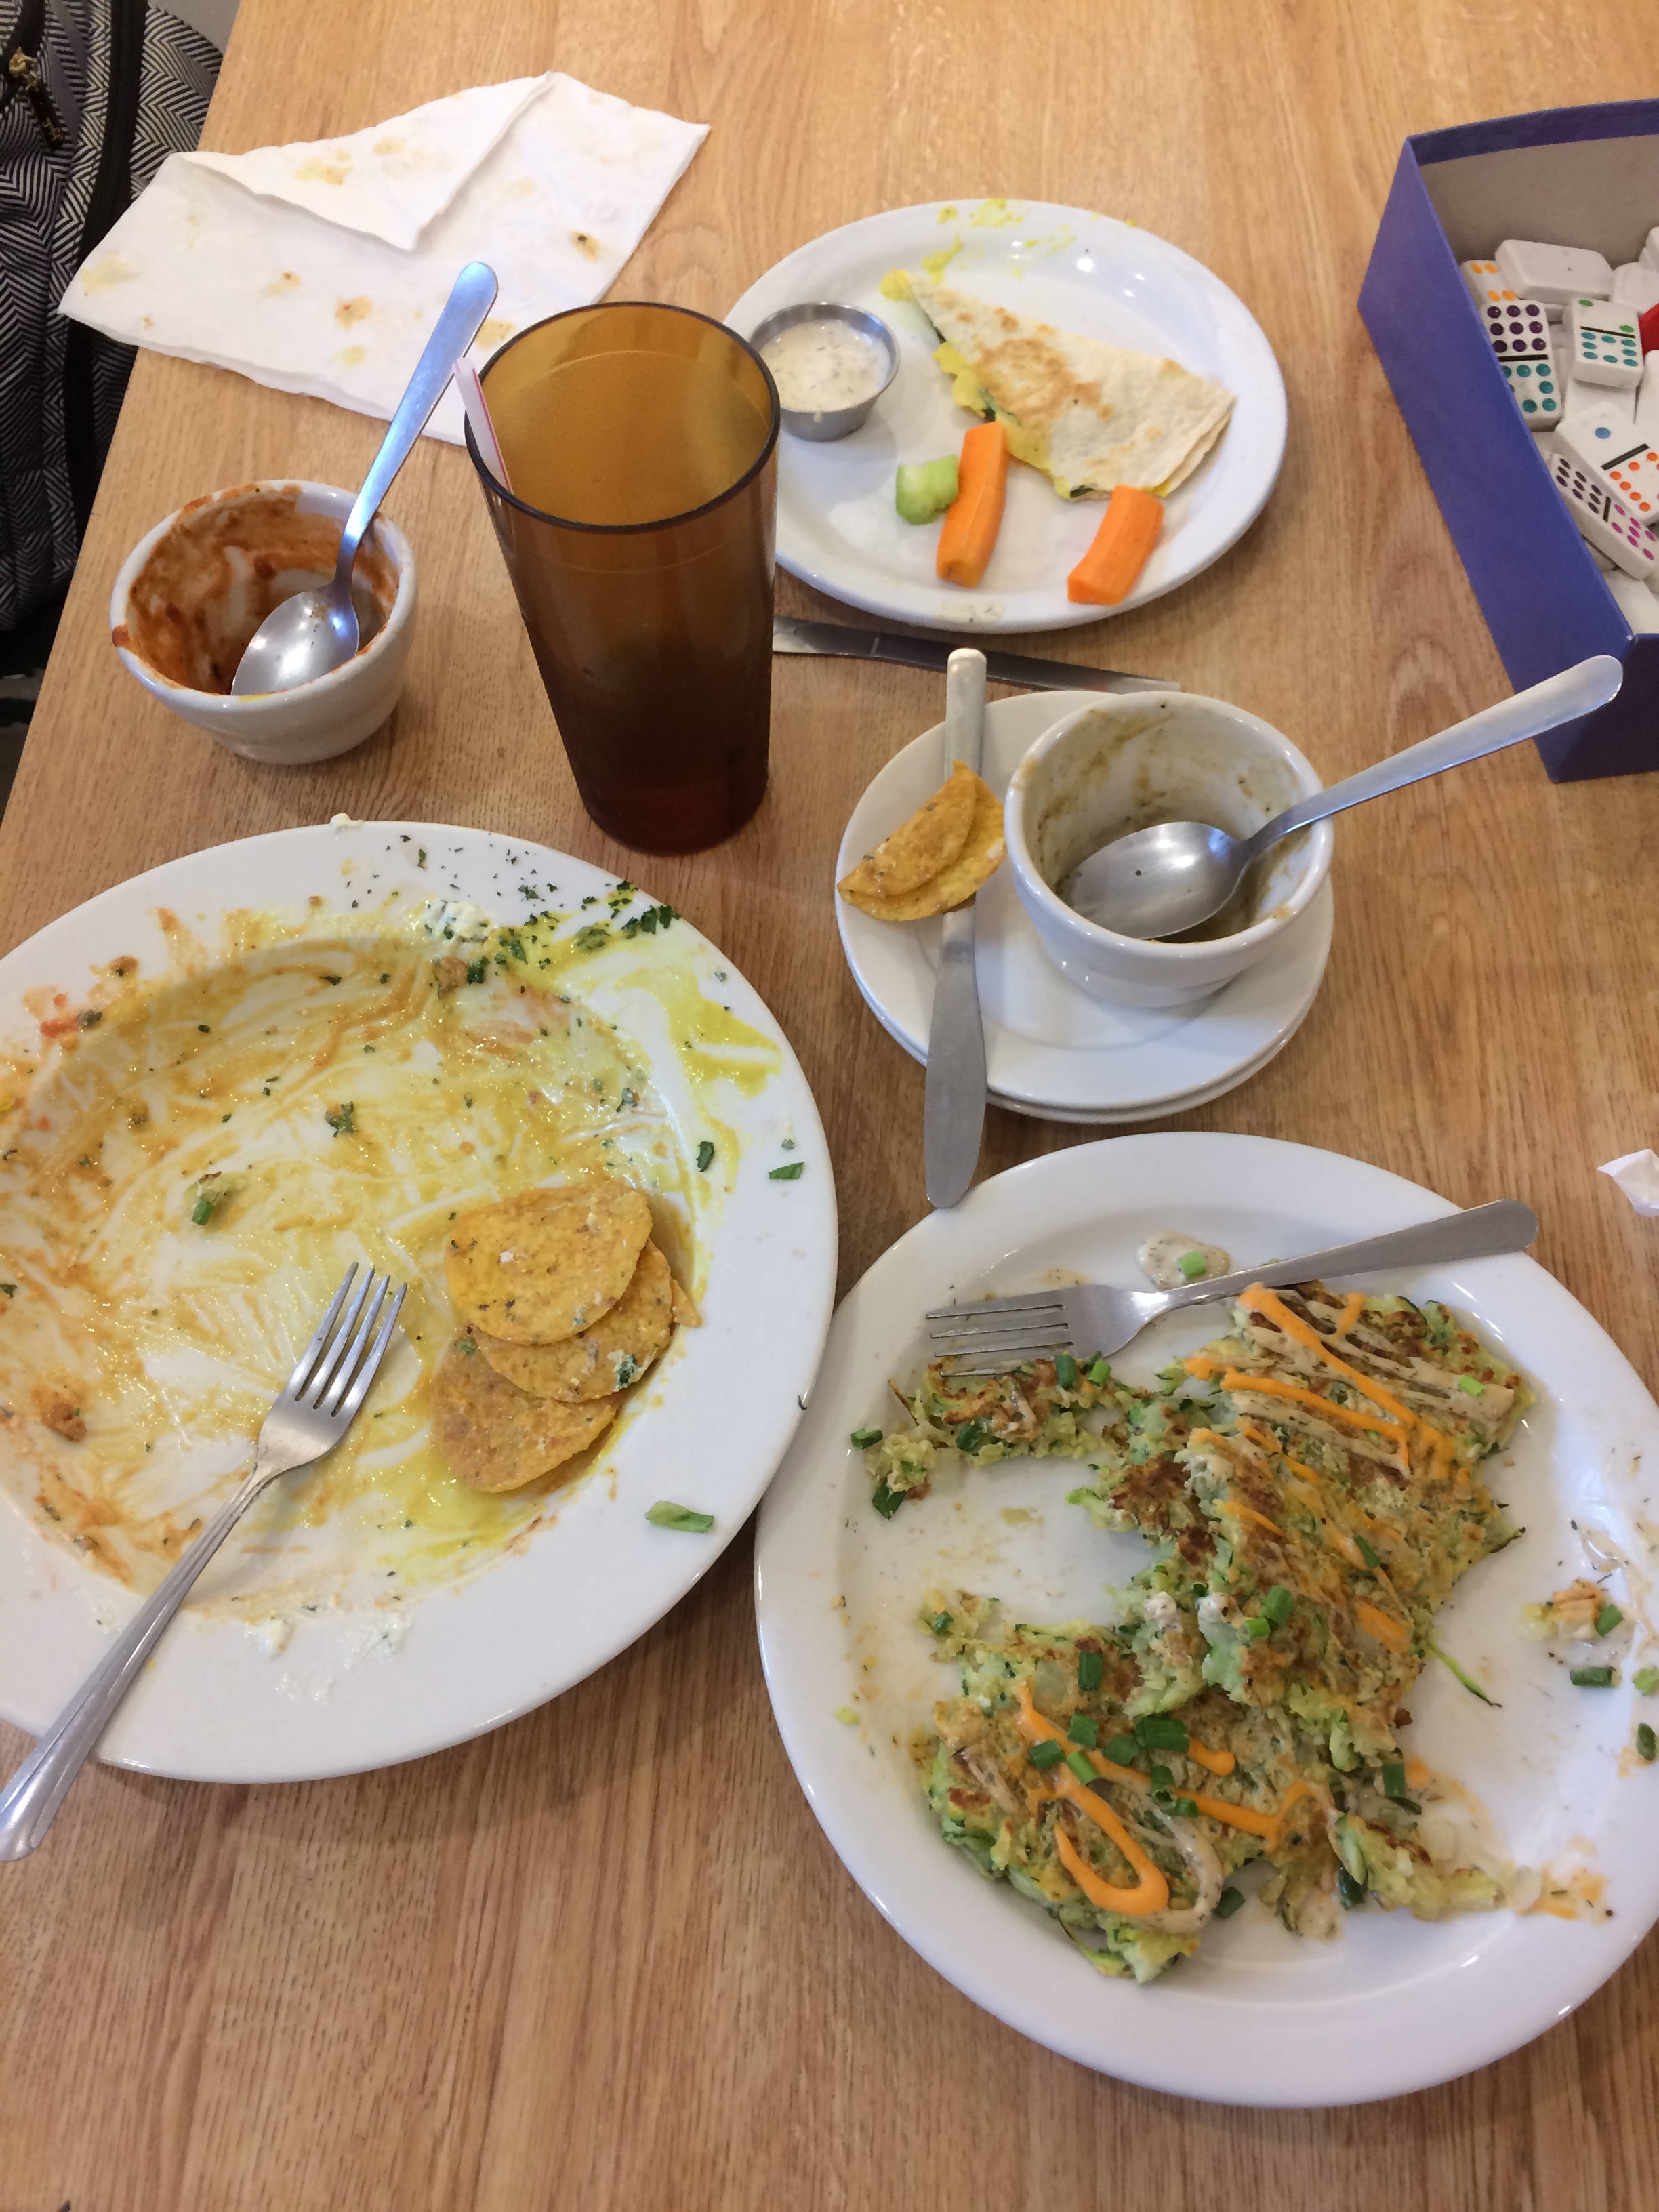 Finished Meal Sluggo's North Vegetarian Cafe in Chattanooga, Tennessee!.JPG